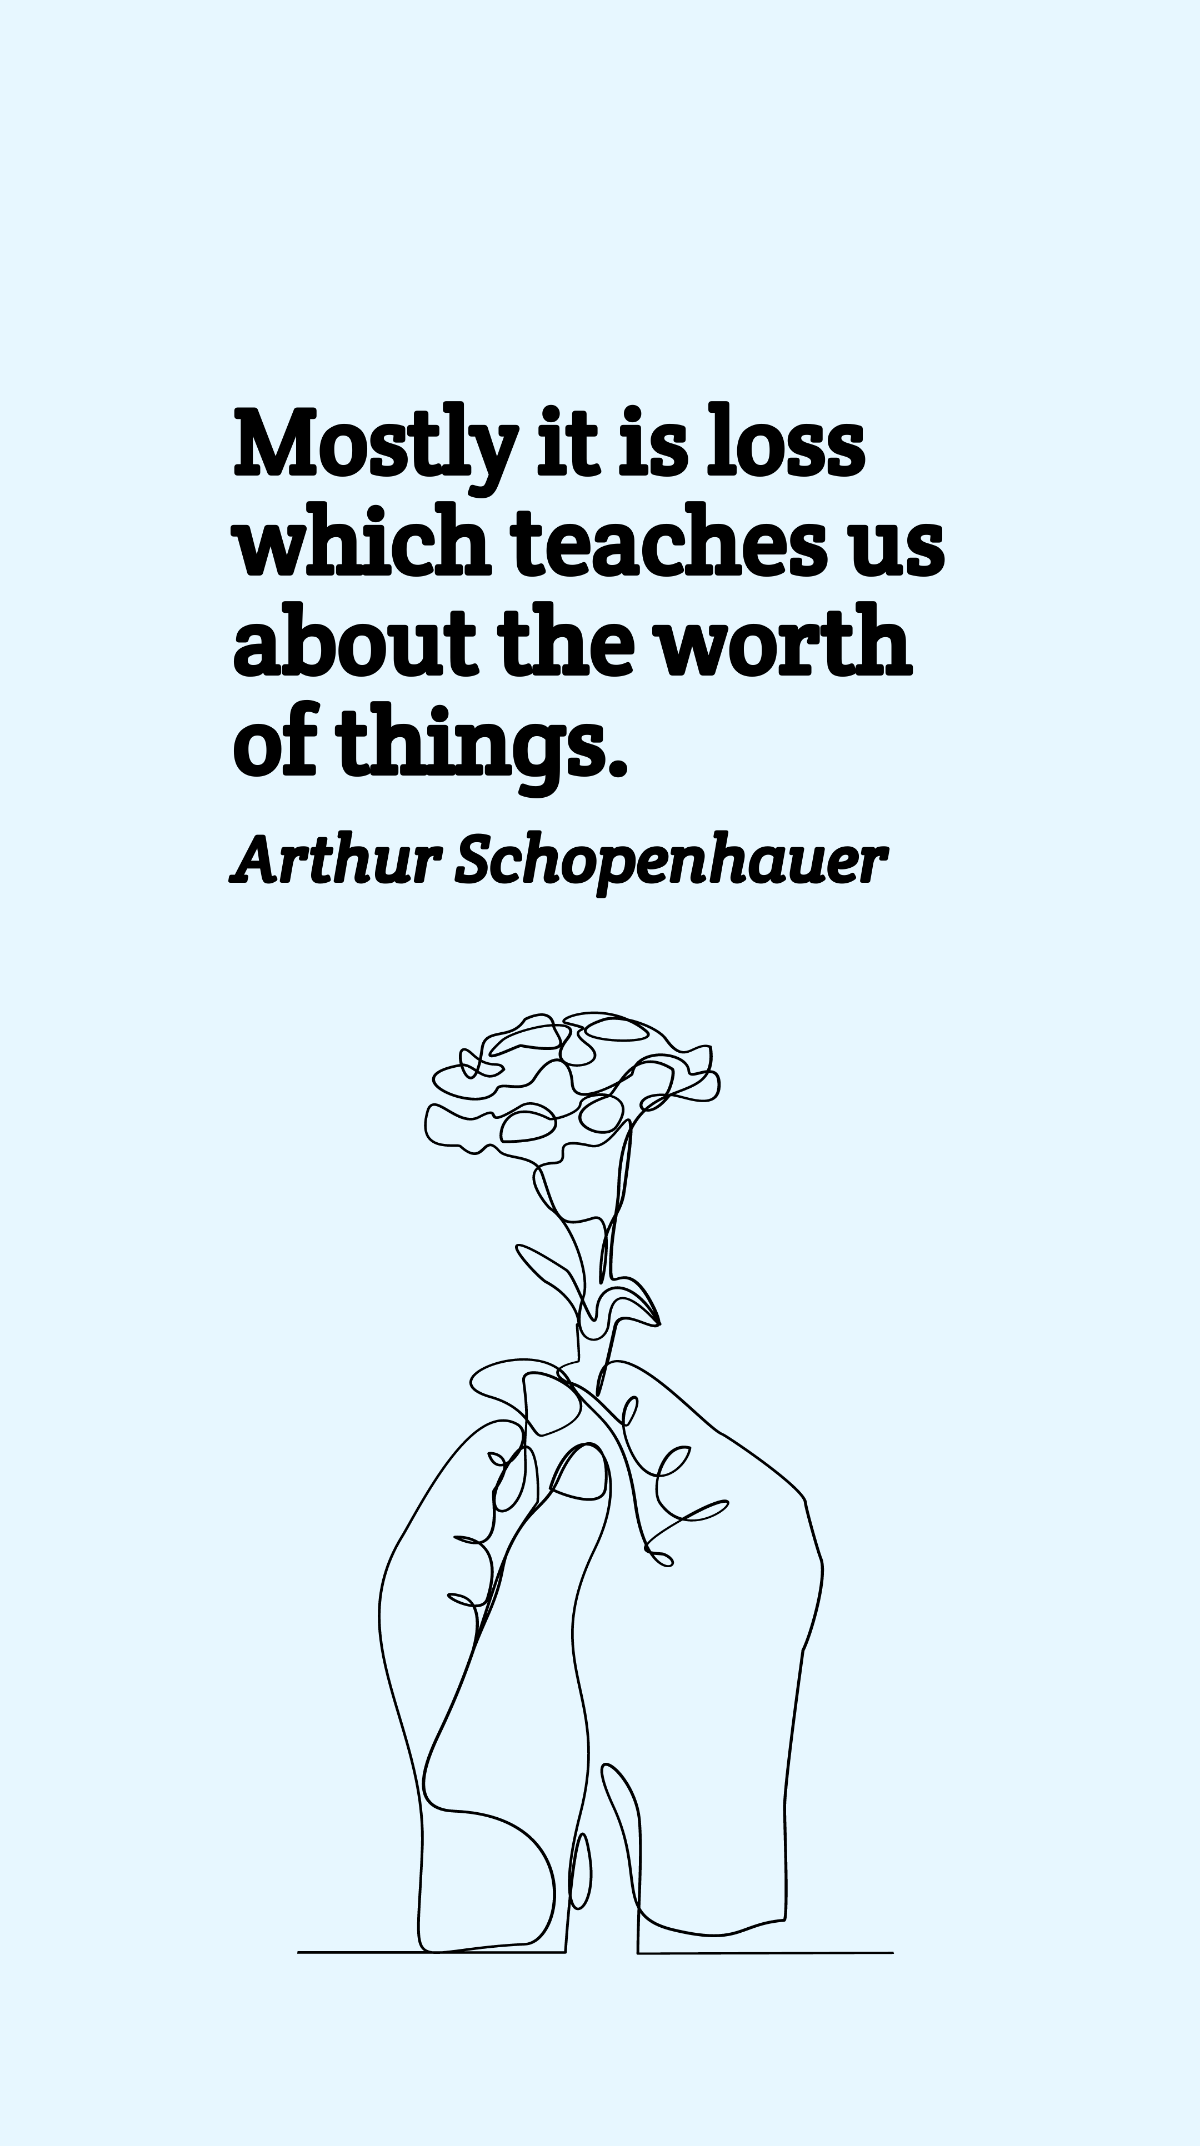 Arthur Schopenhauer - Mostly it is loss which teaches us about the worth of things. Template